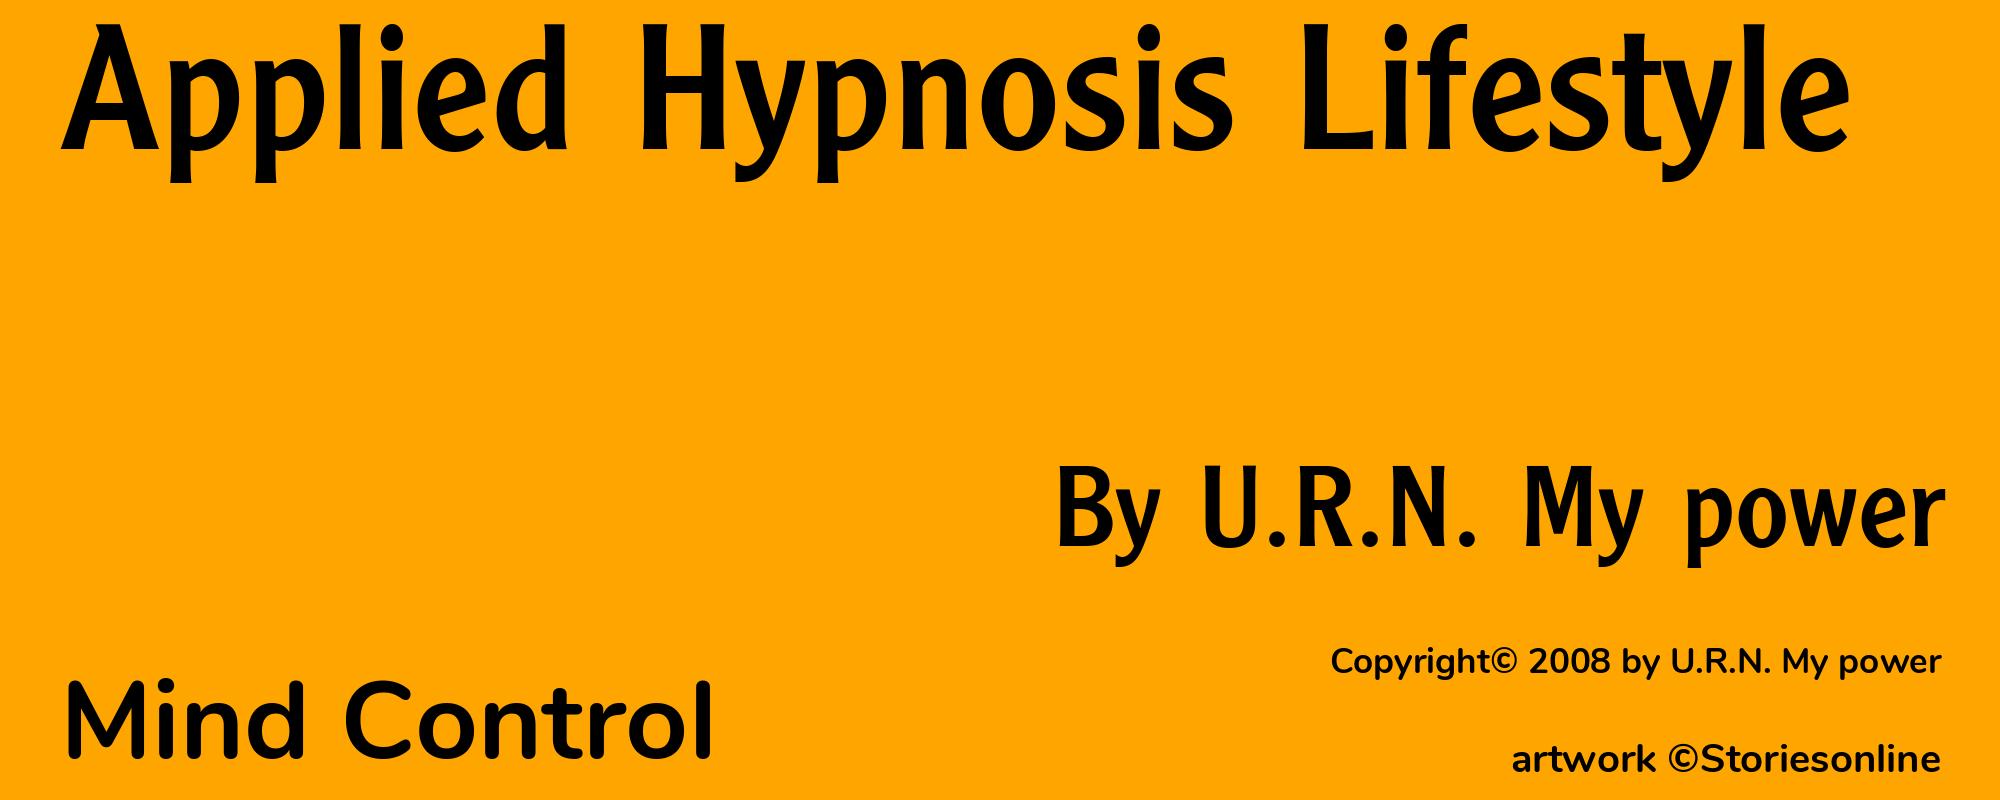 Applied Hypnosis Lifestyle - Cover